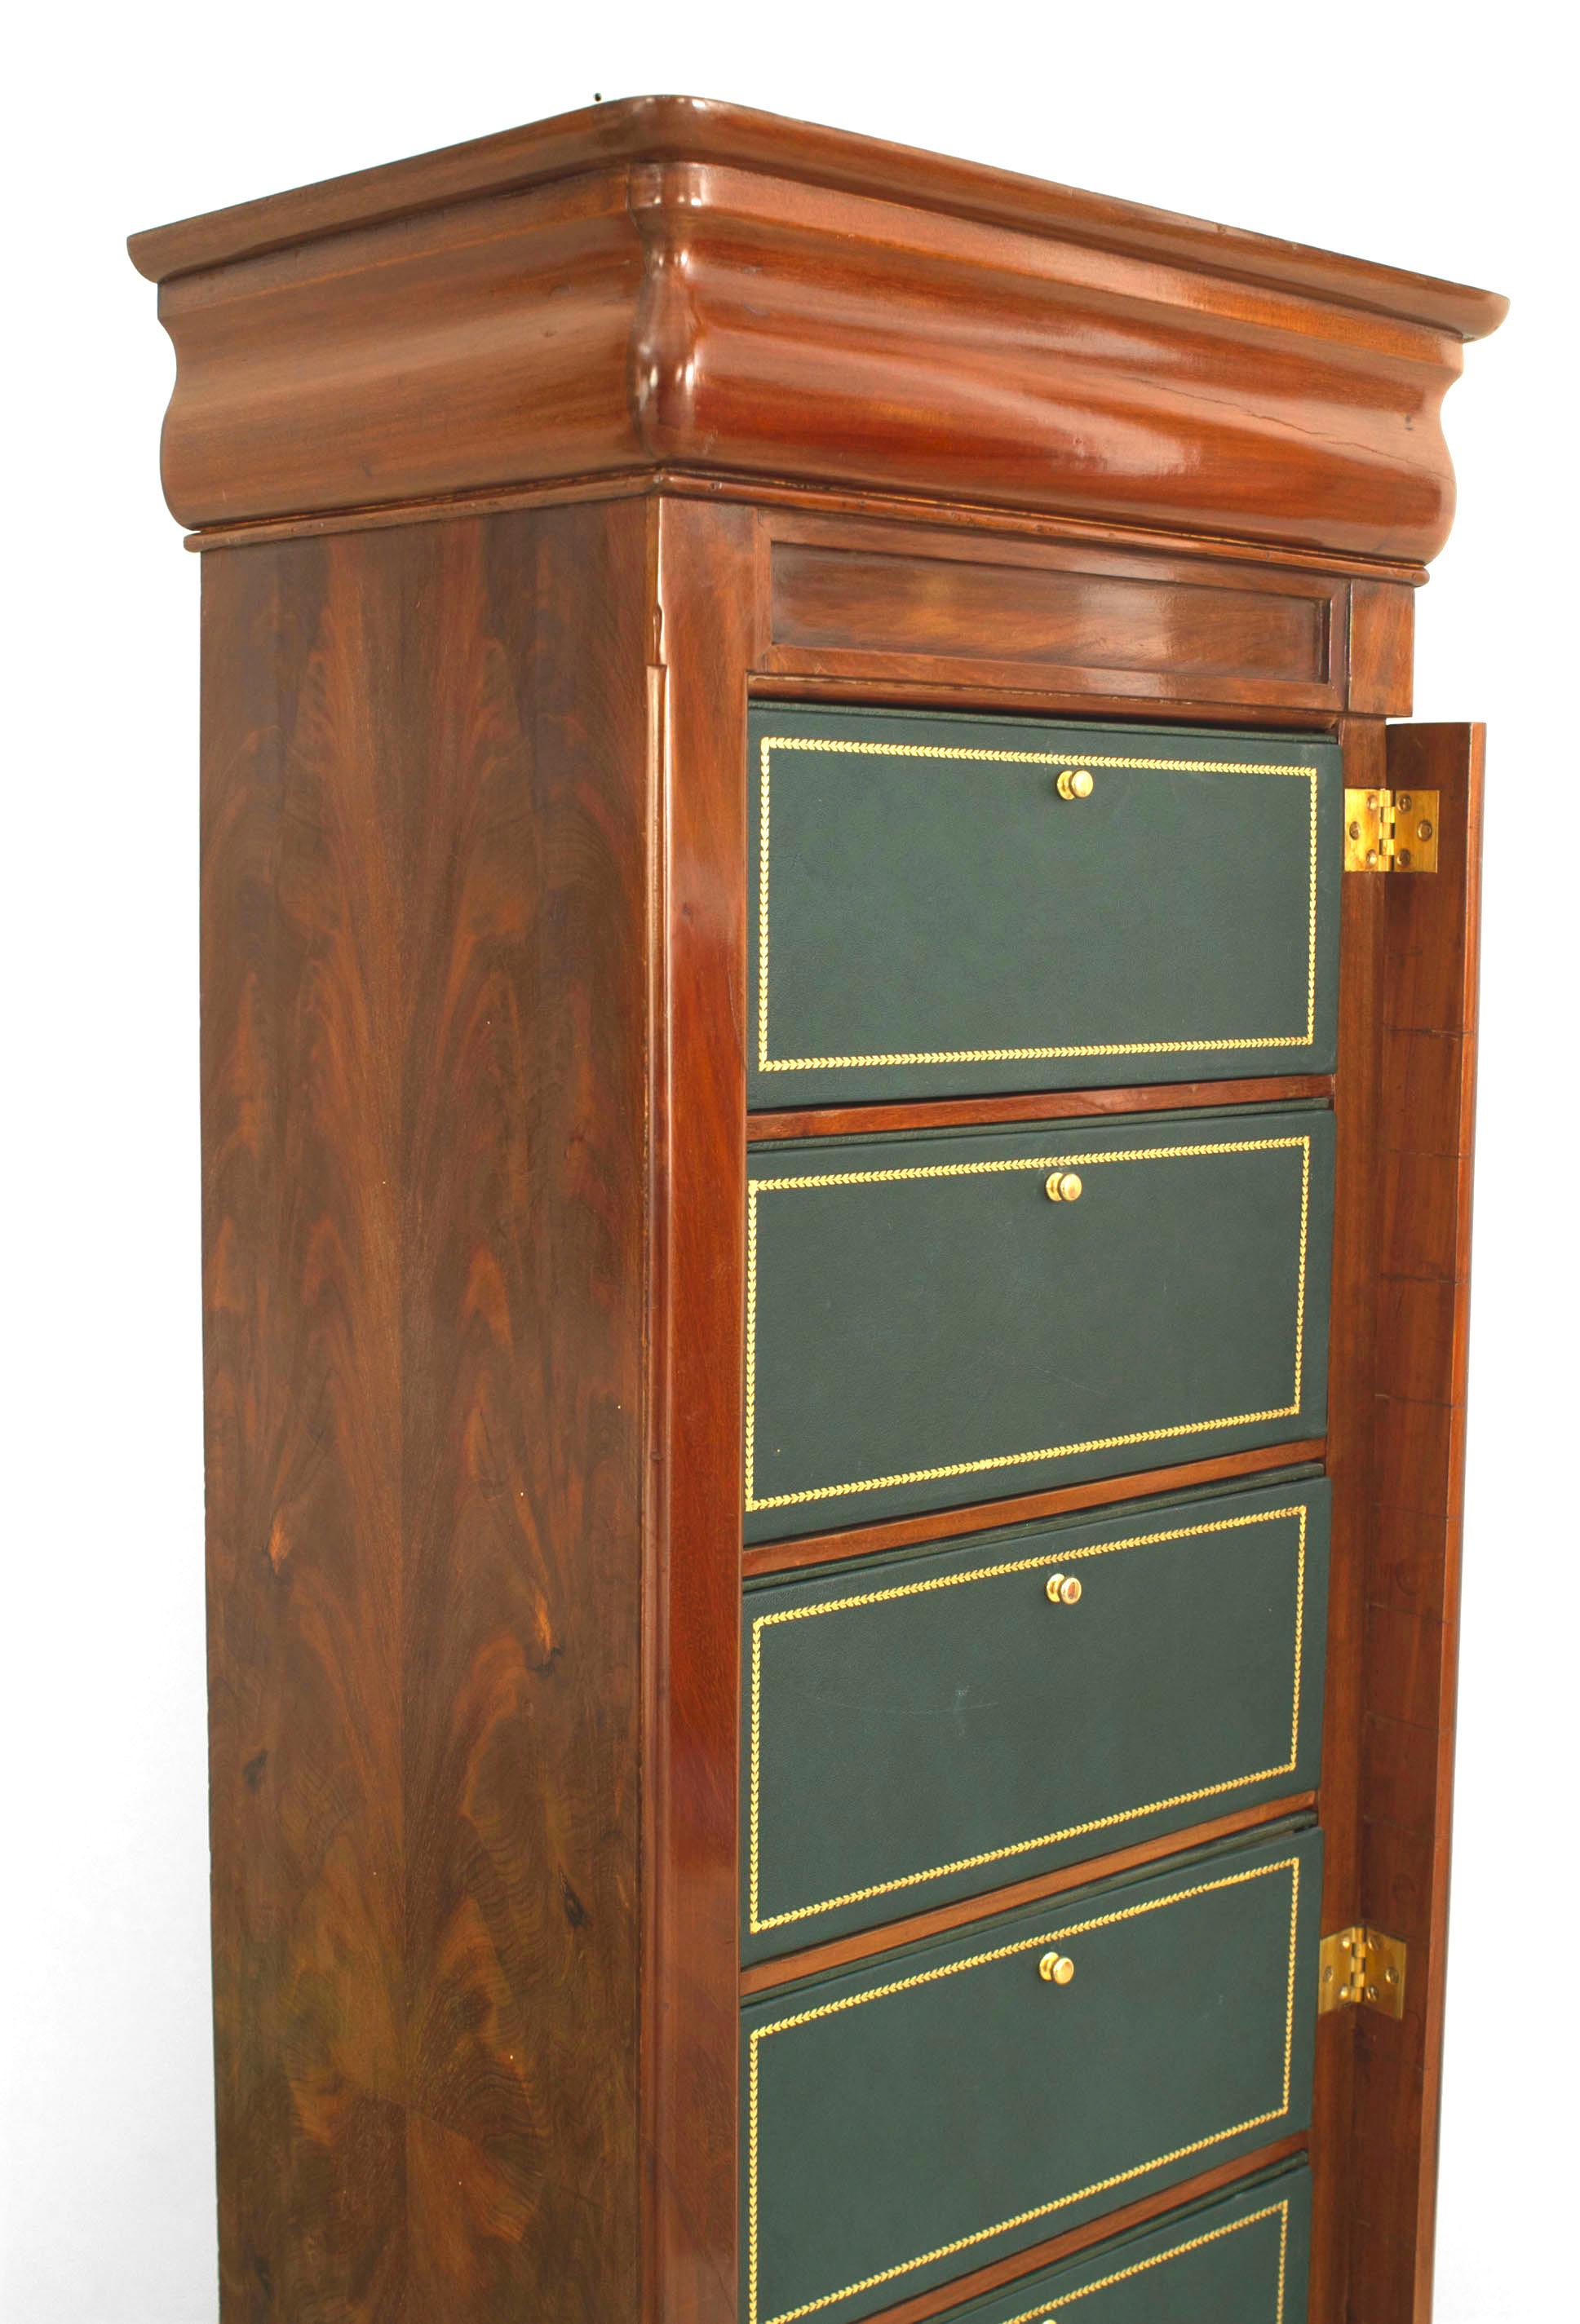 European Continental Mahogany Semainier Chest with Green Leather Drawers